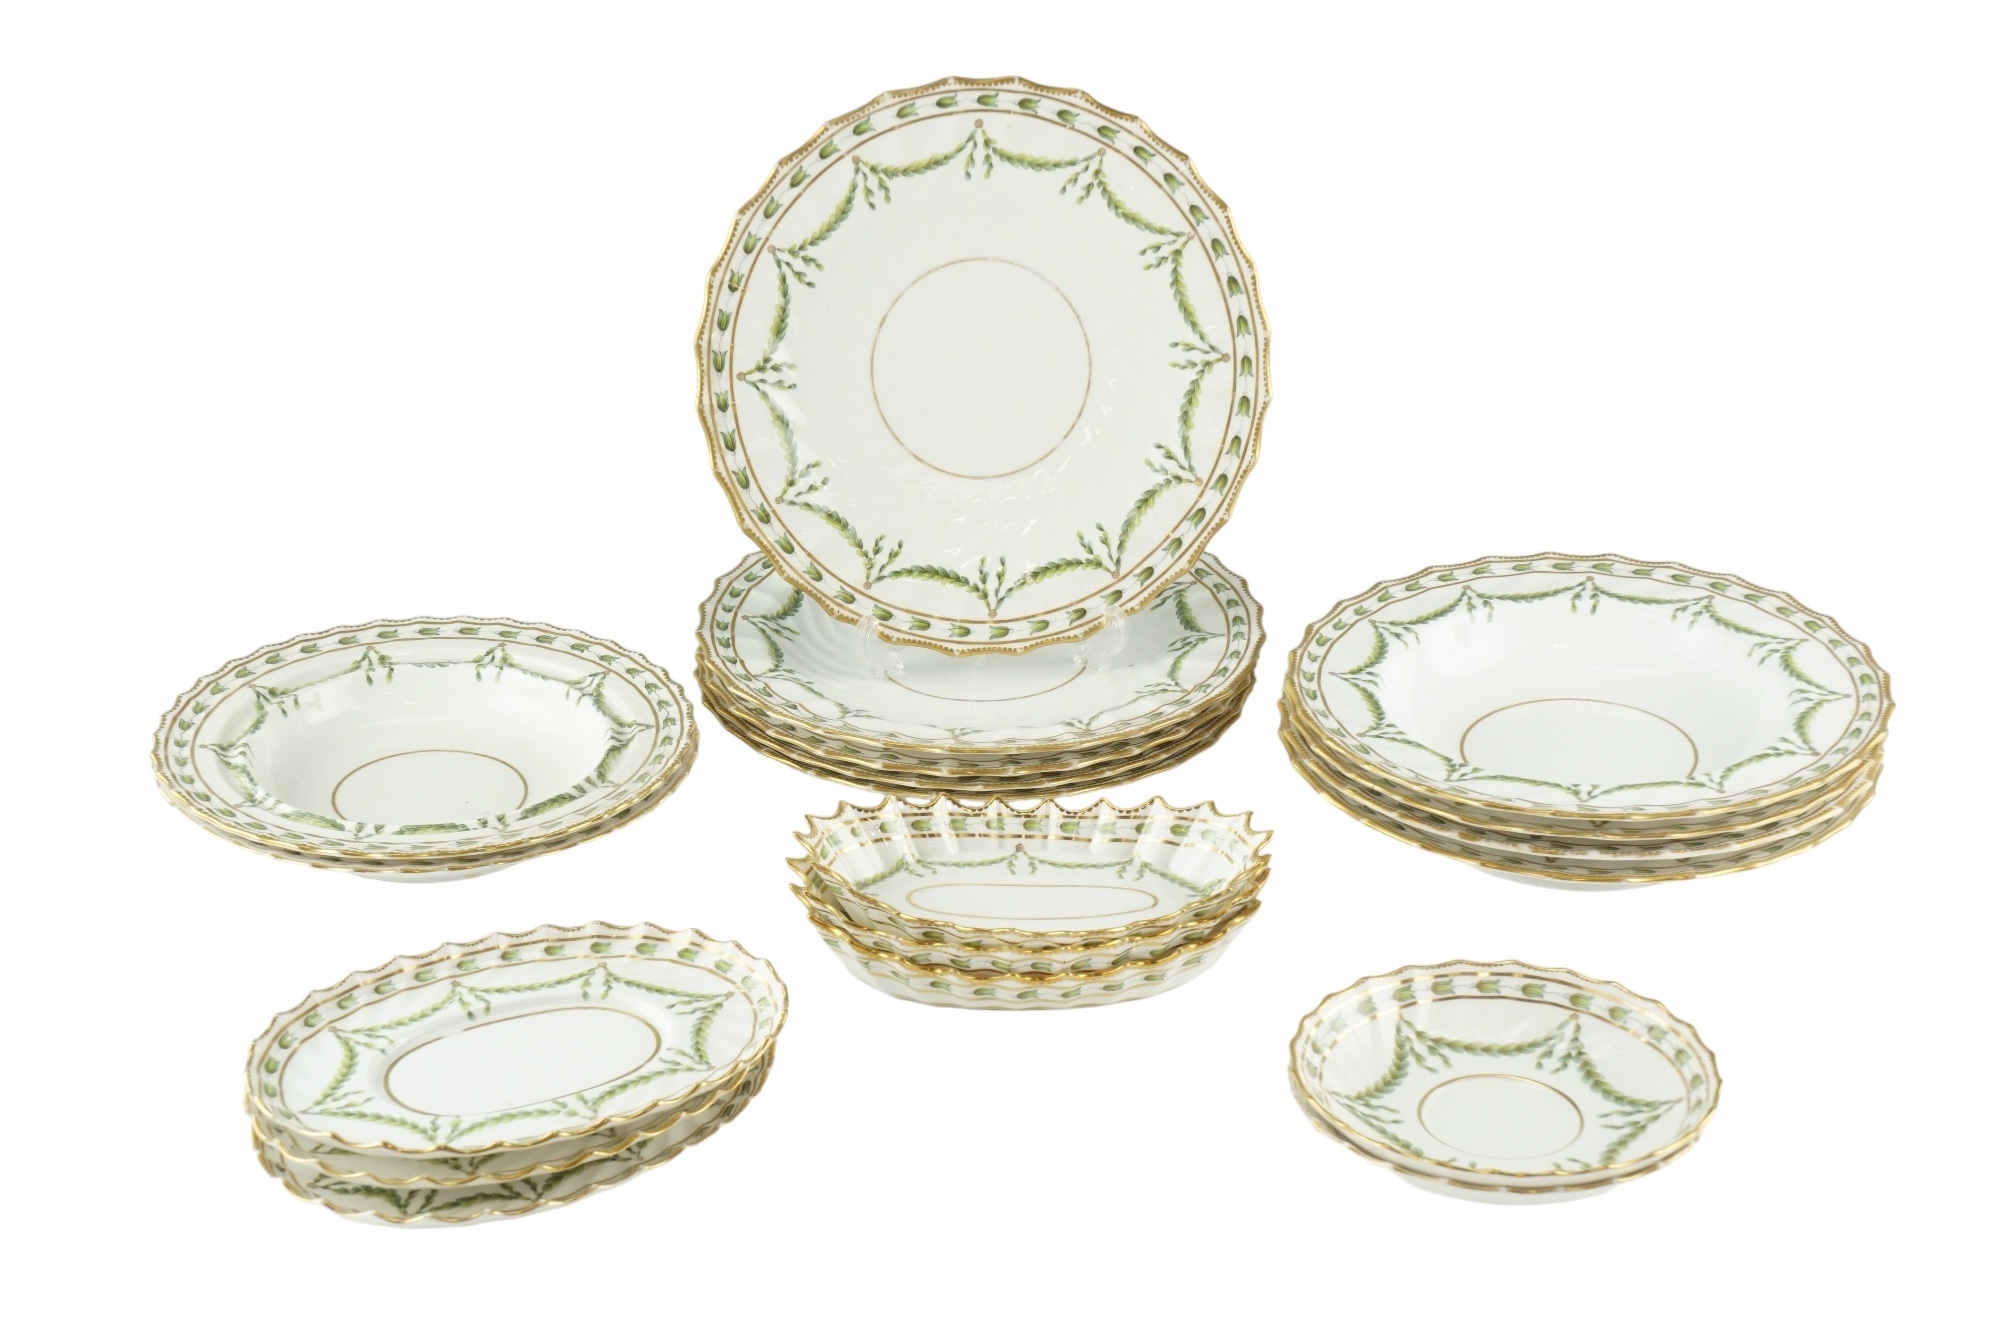 A quantity of early 20th Century Copeland hand-painted dinnerware, decorated with laurel garlands